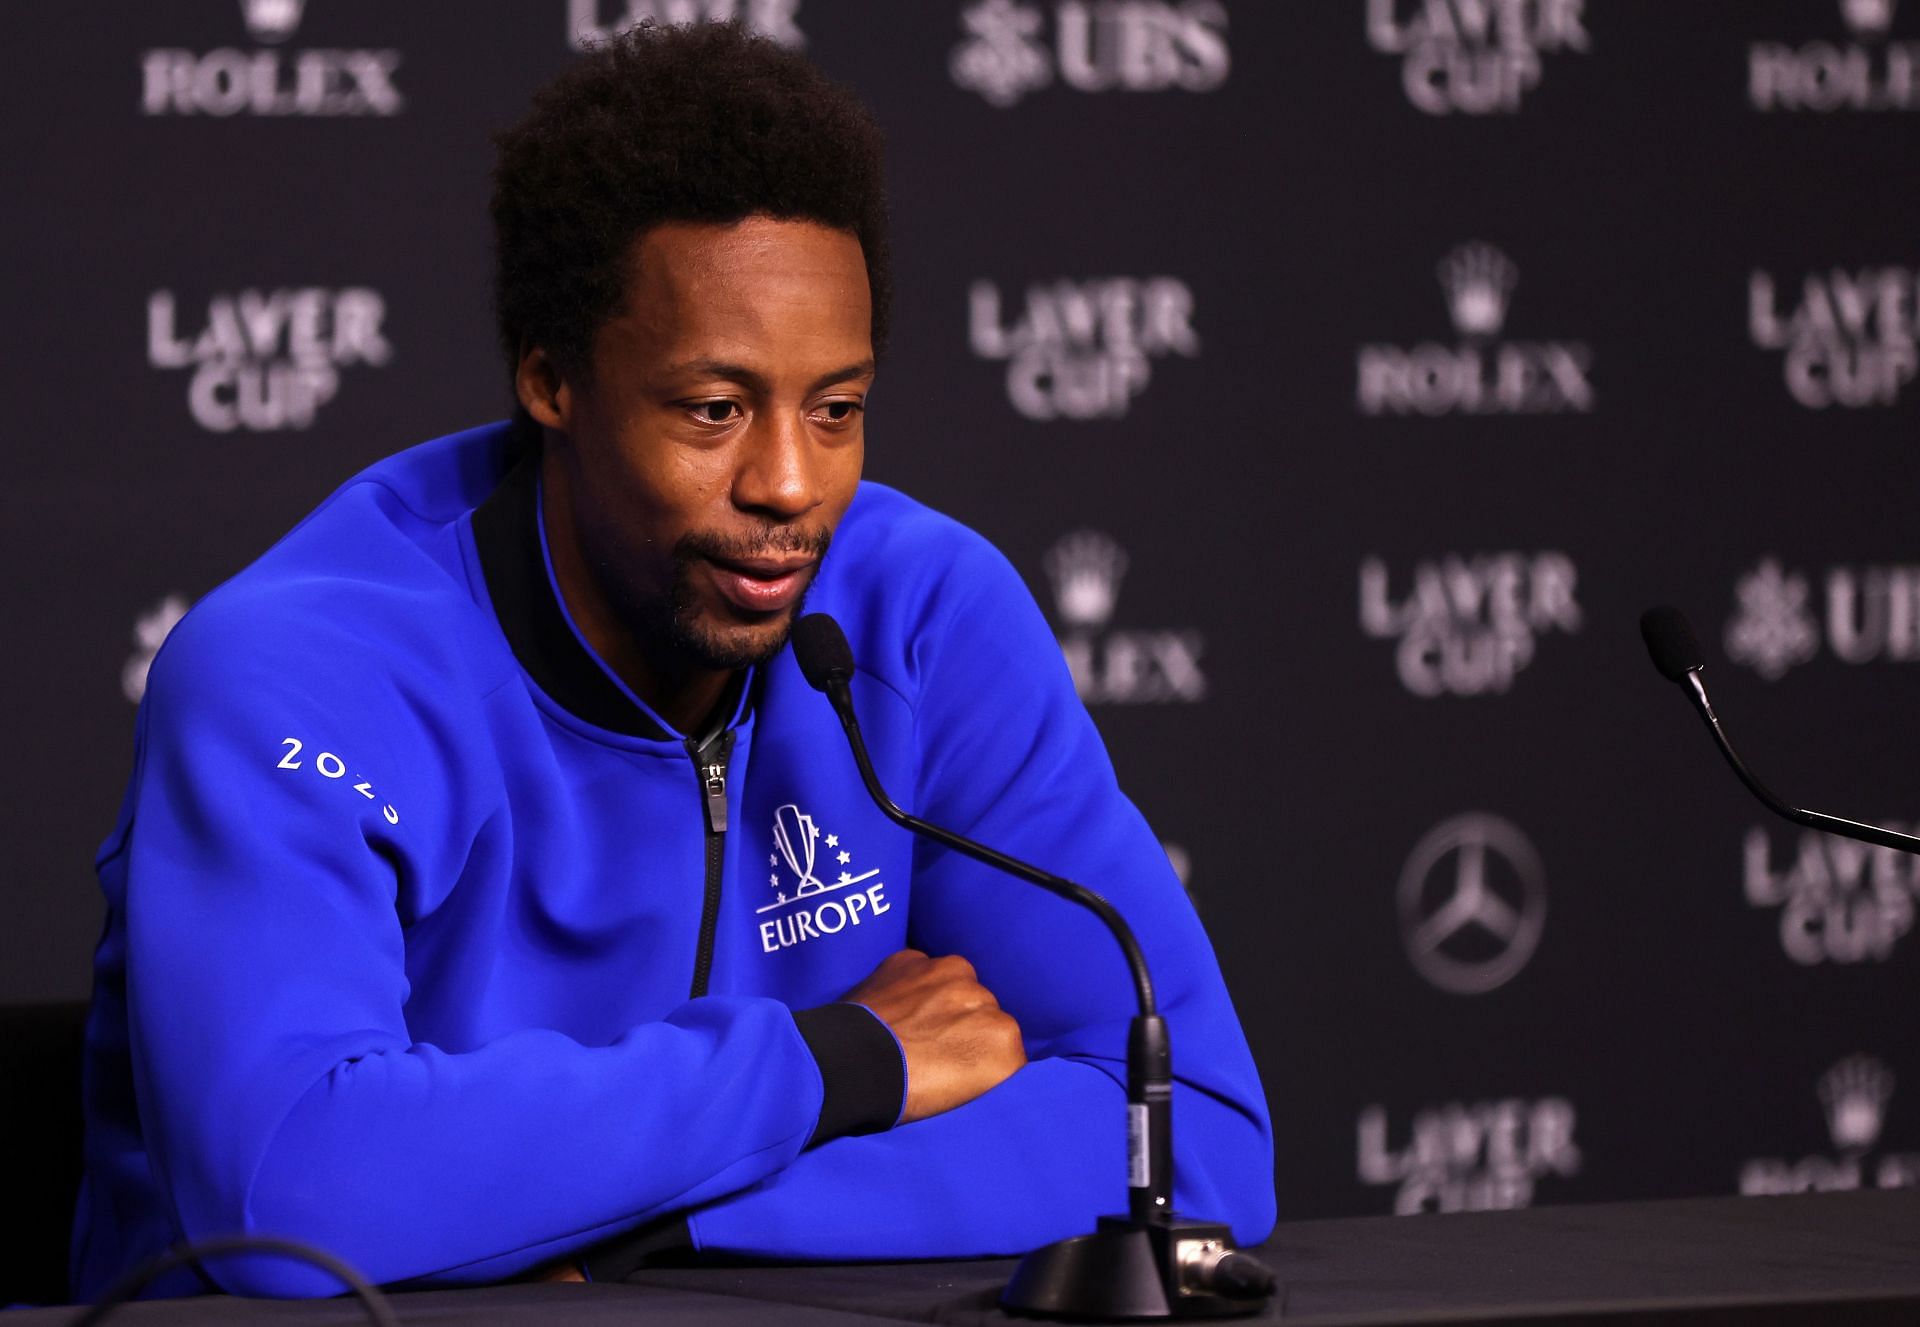 Gael Monfils at the Laver Cup